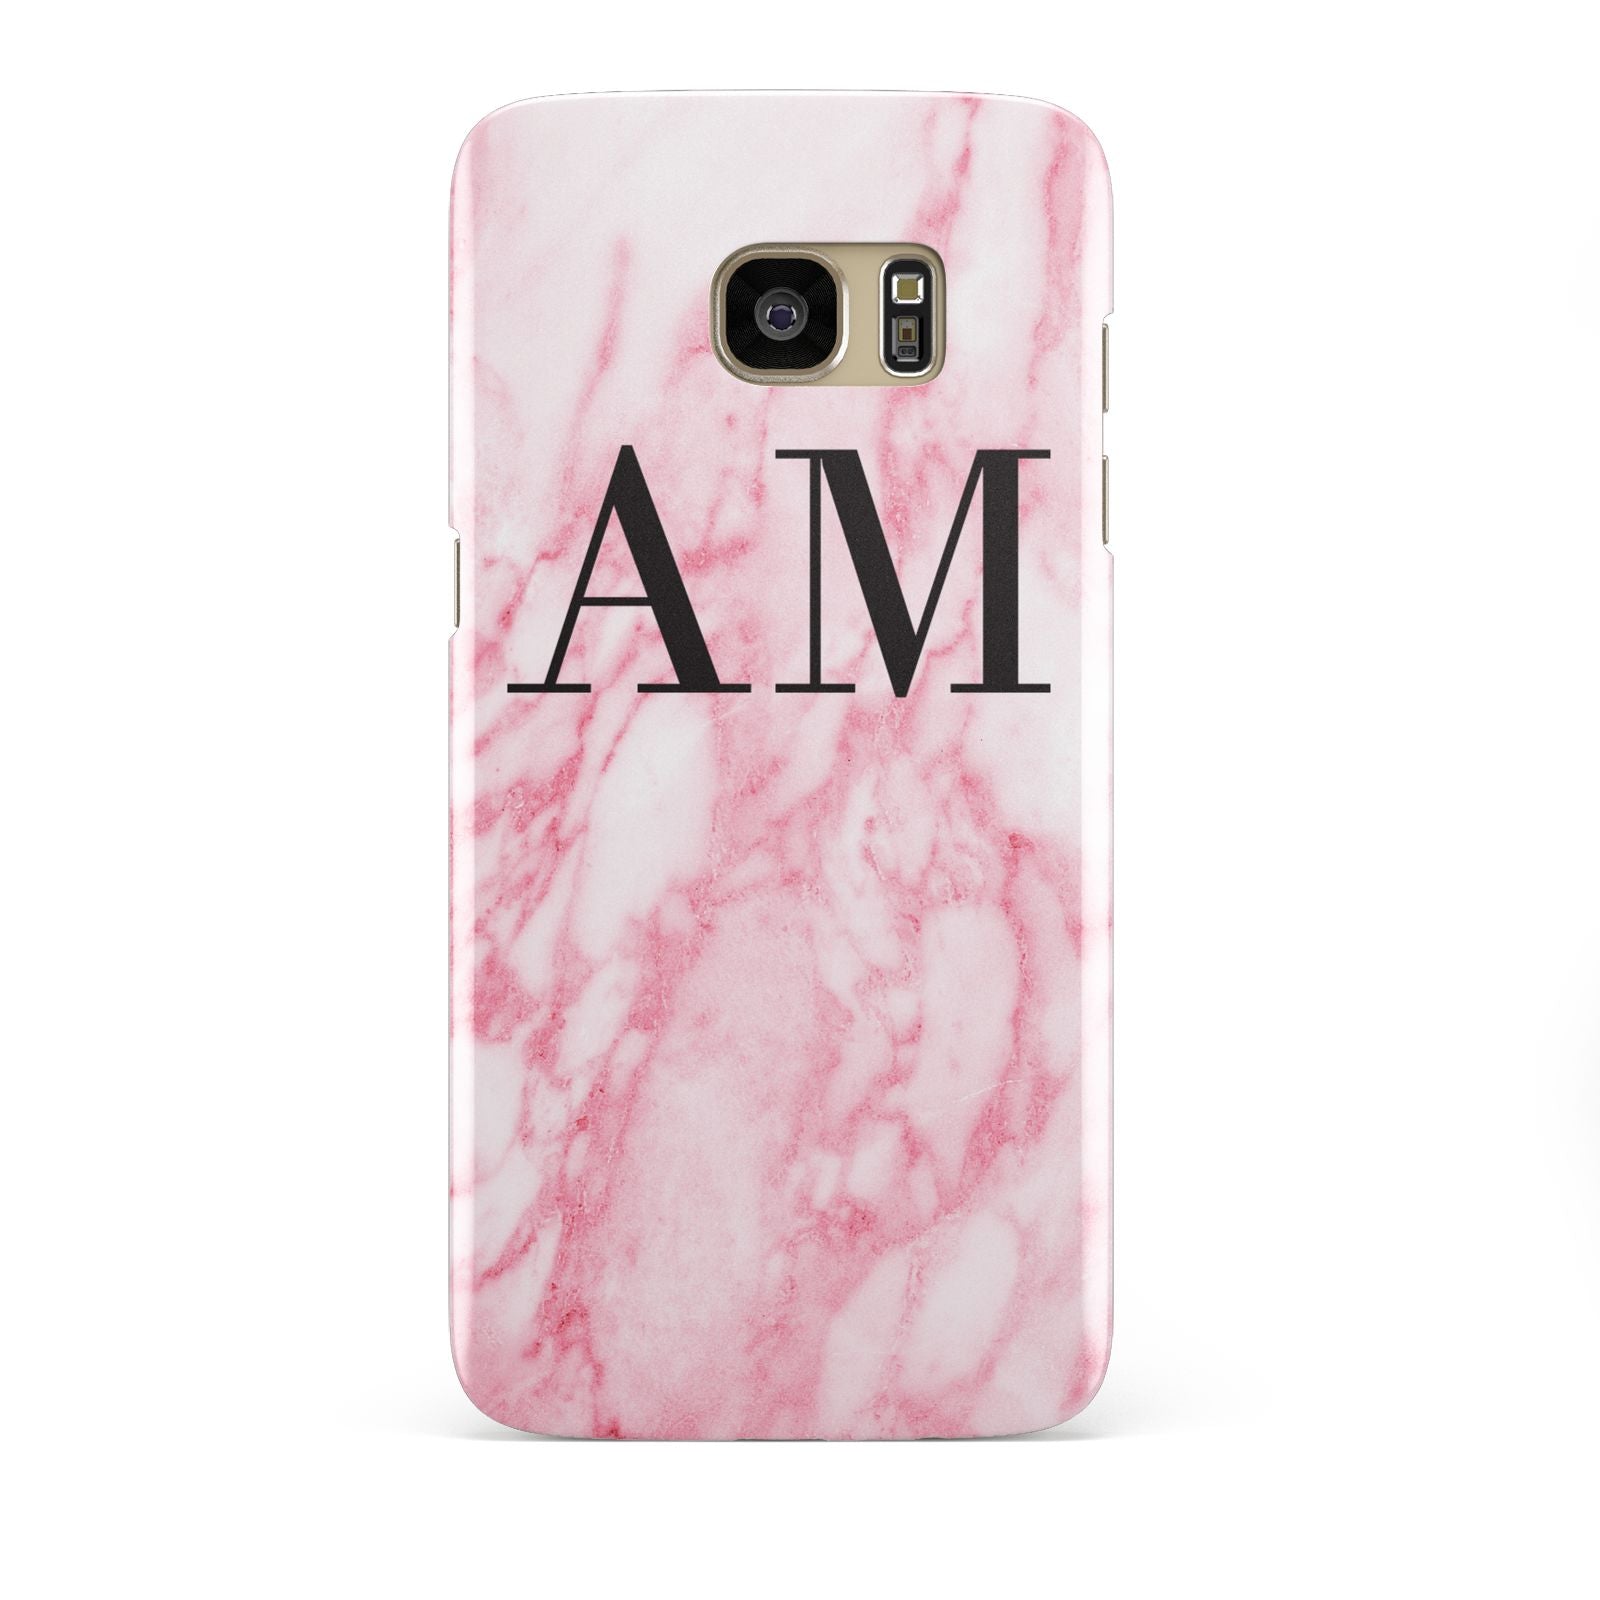 Personalised Pink Marble Monogrammed Samsung Galaxy S7 Edge Case